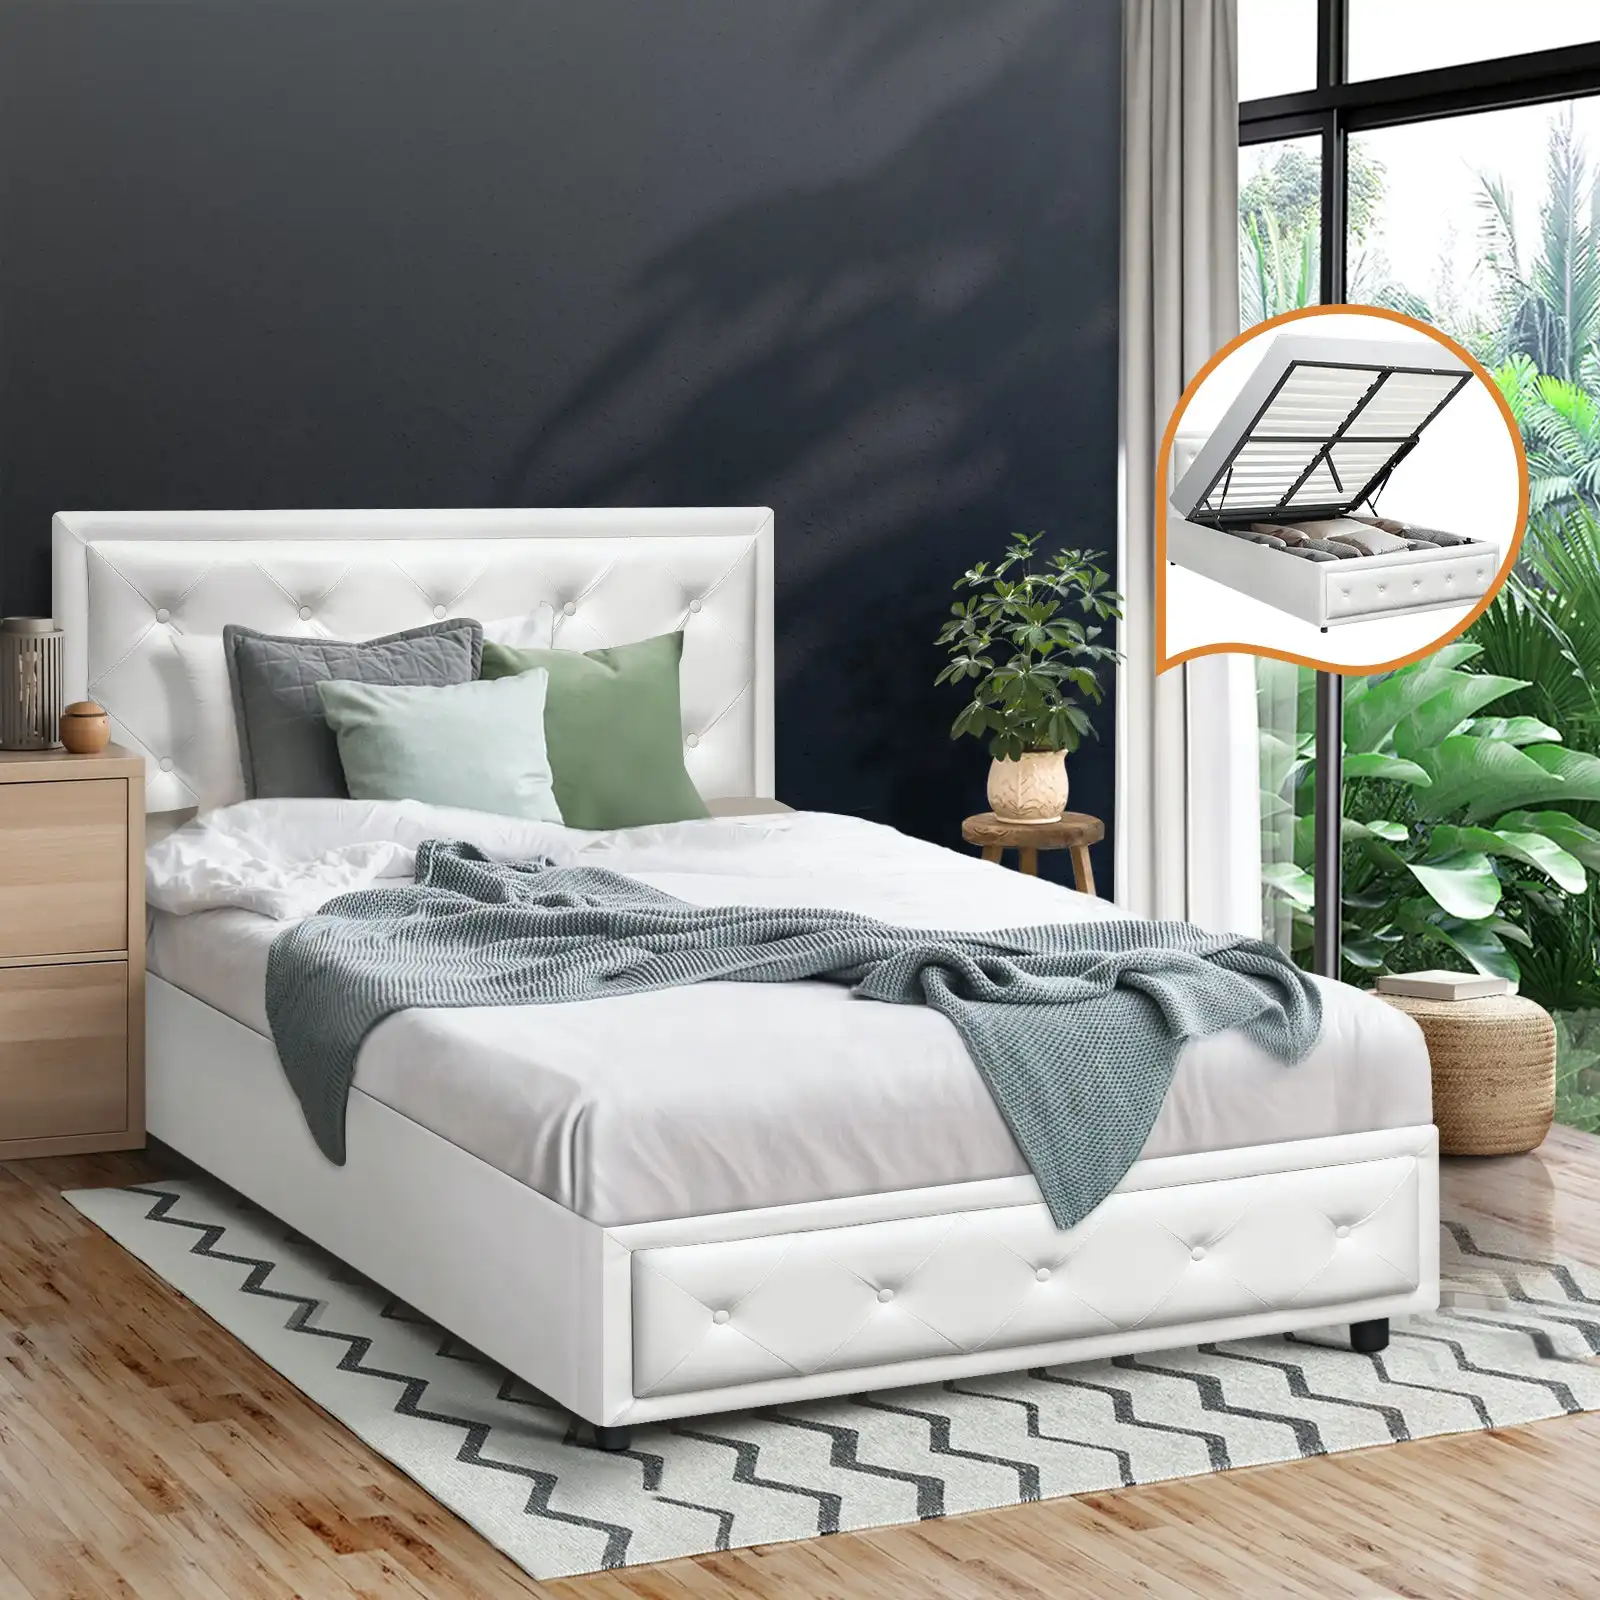 Oikiture Bed Frame King Single Size Gas Lift Base With Storage White Leather